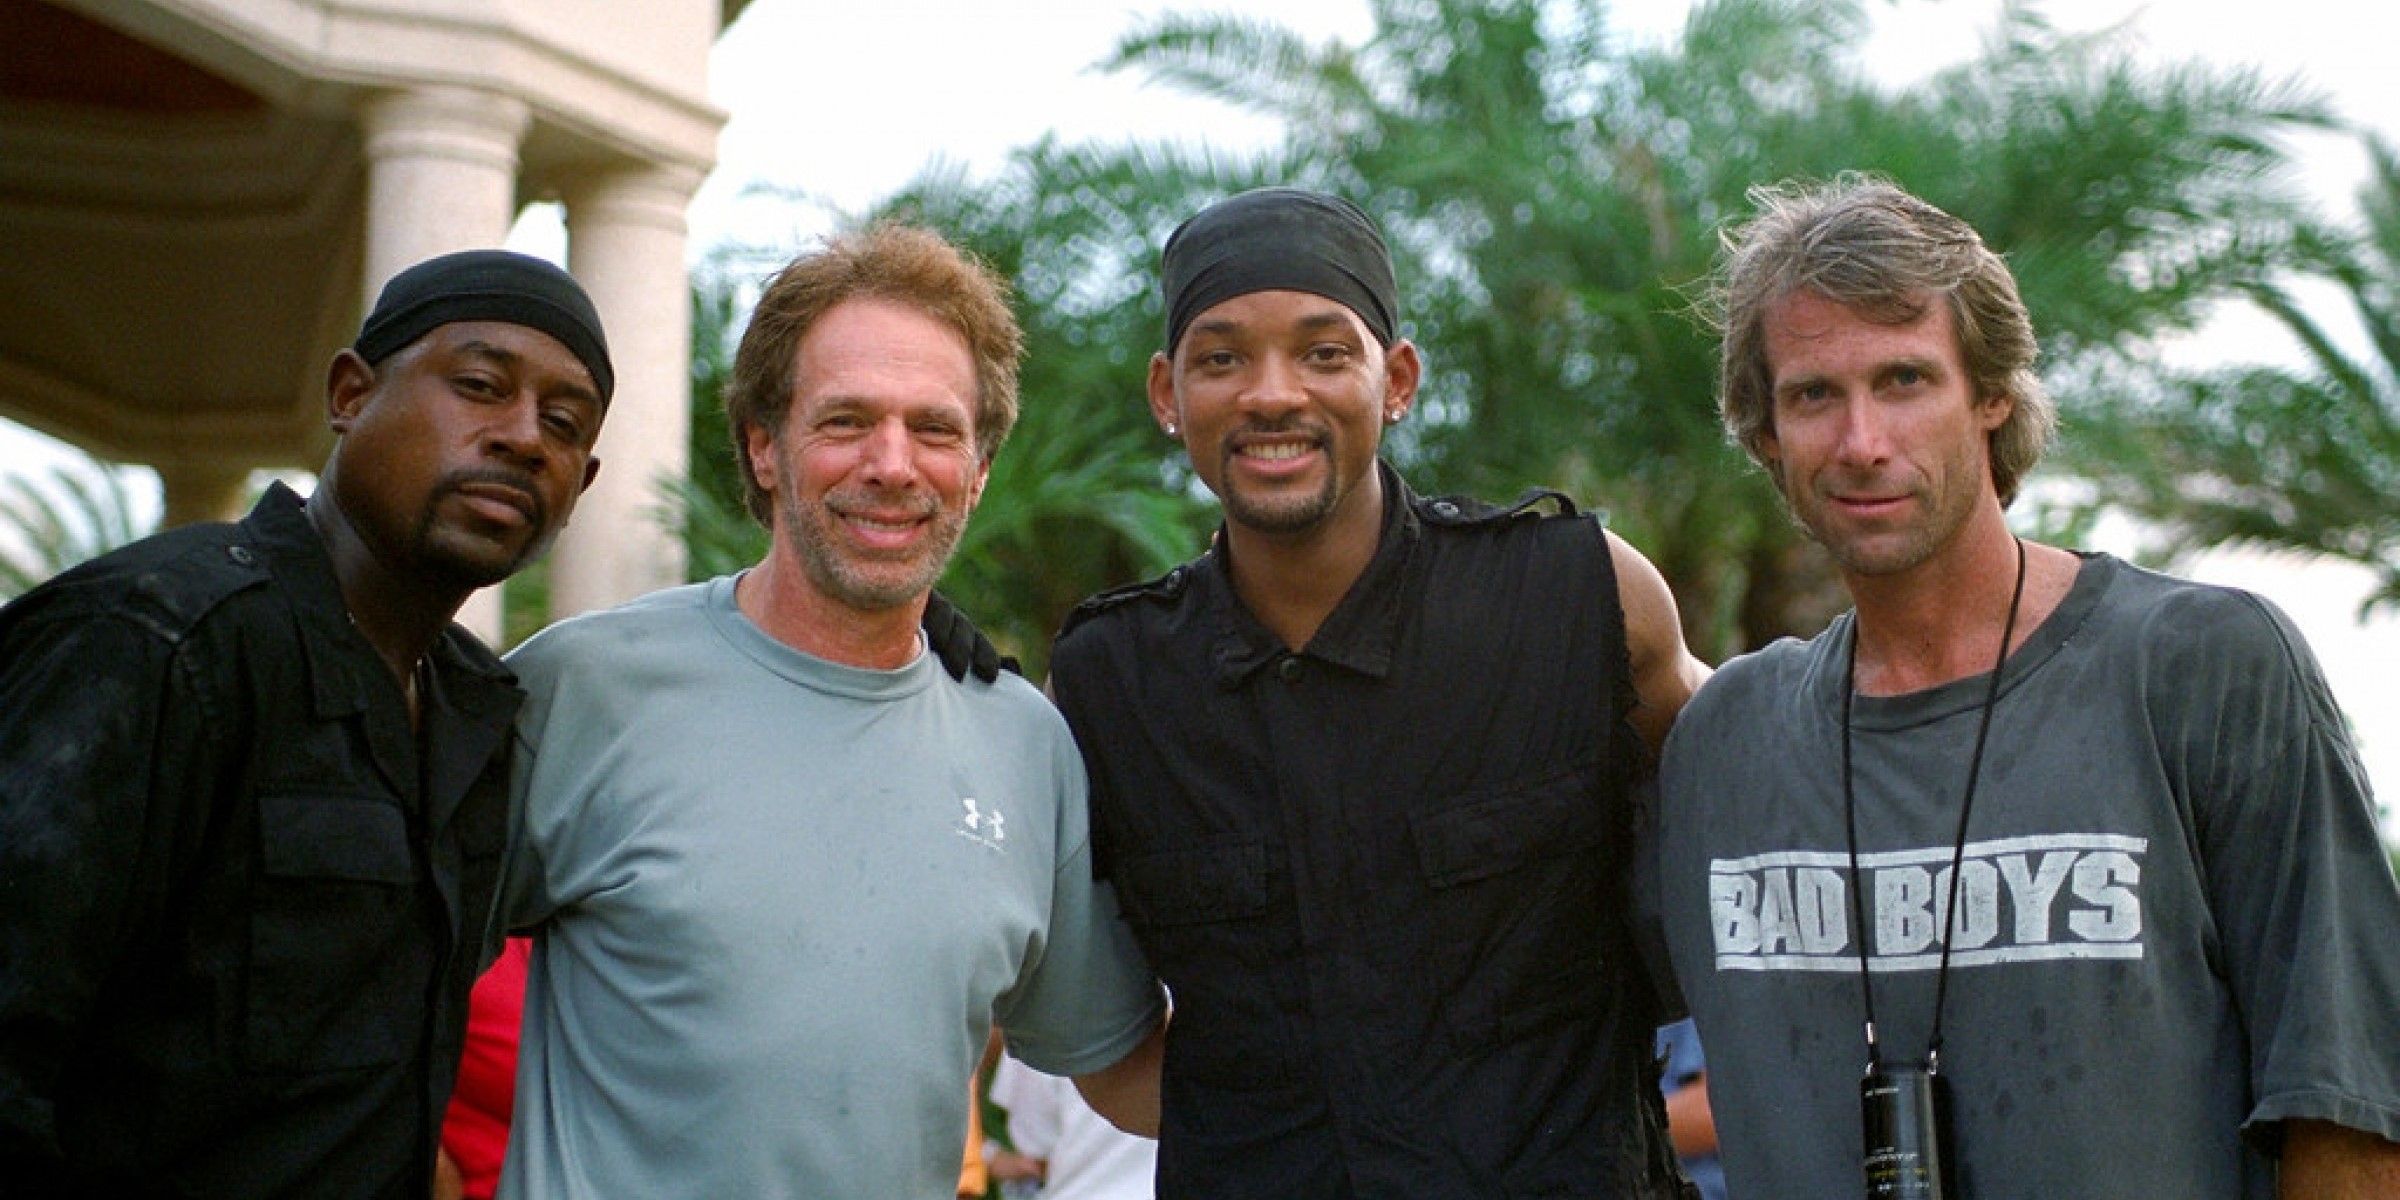 Behind the scenes of the set of Bad Boys